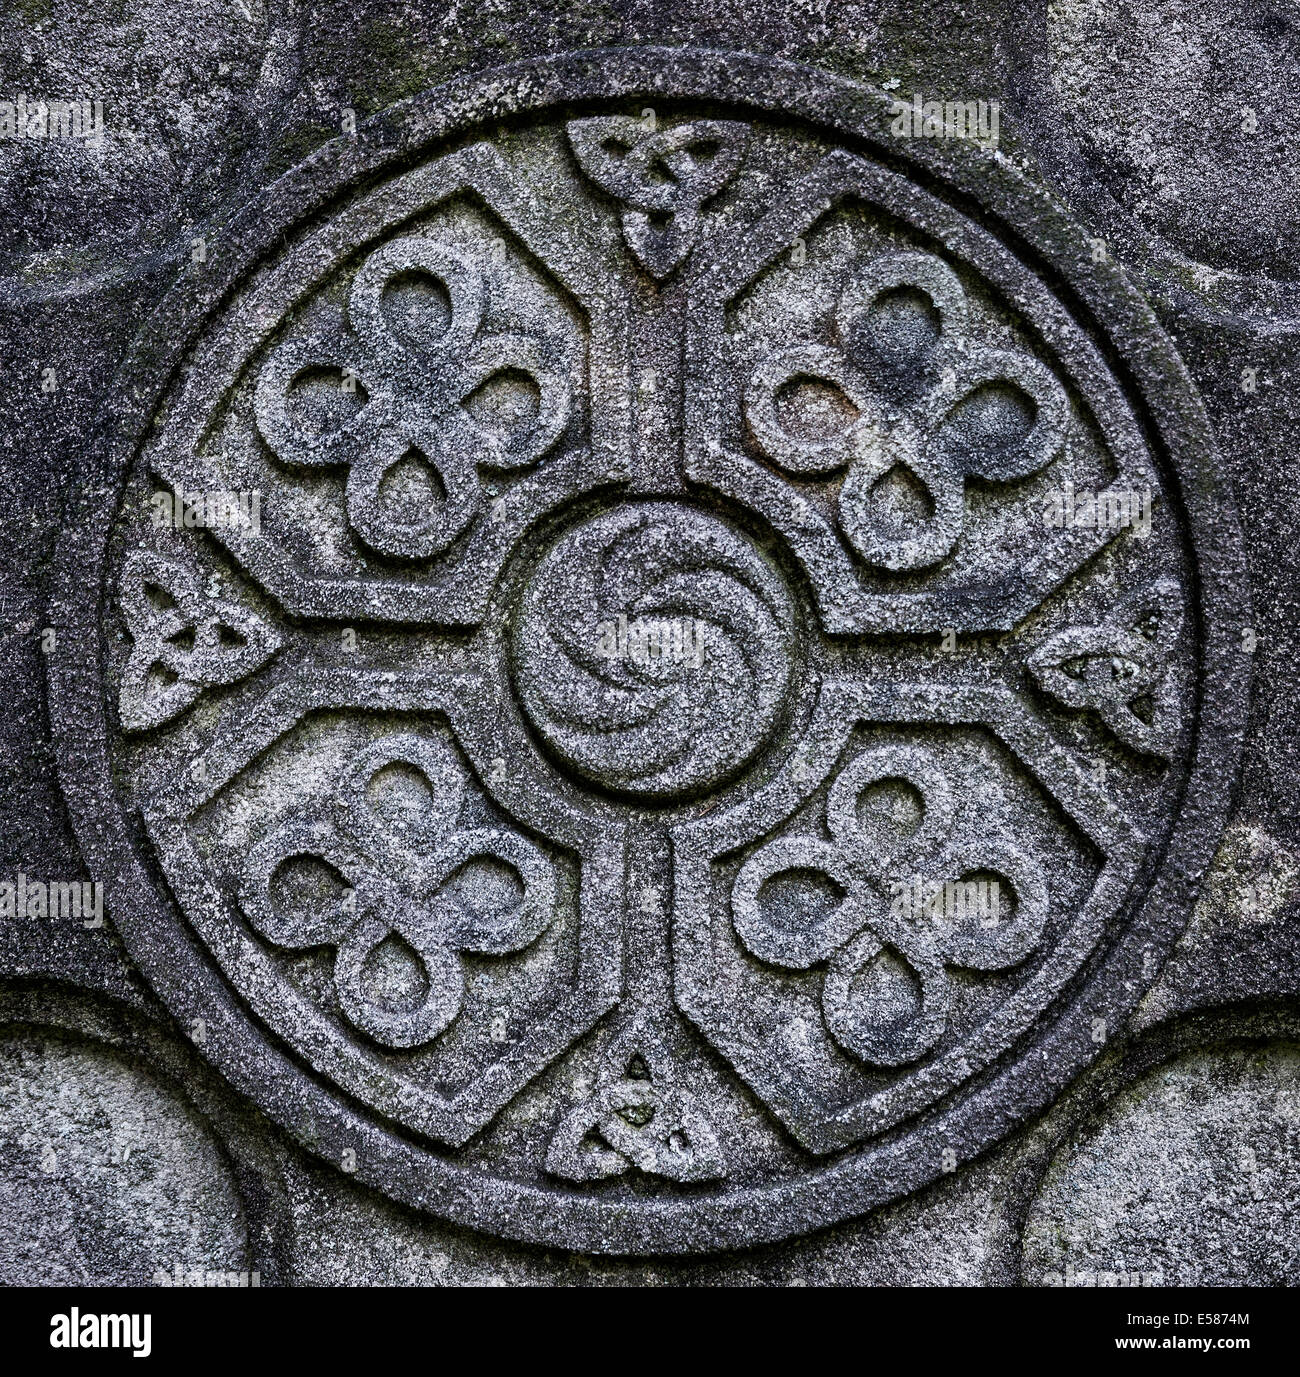 Celtic cross detail with knot symbol designs. Stock Photo